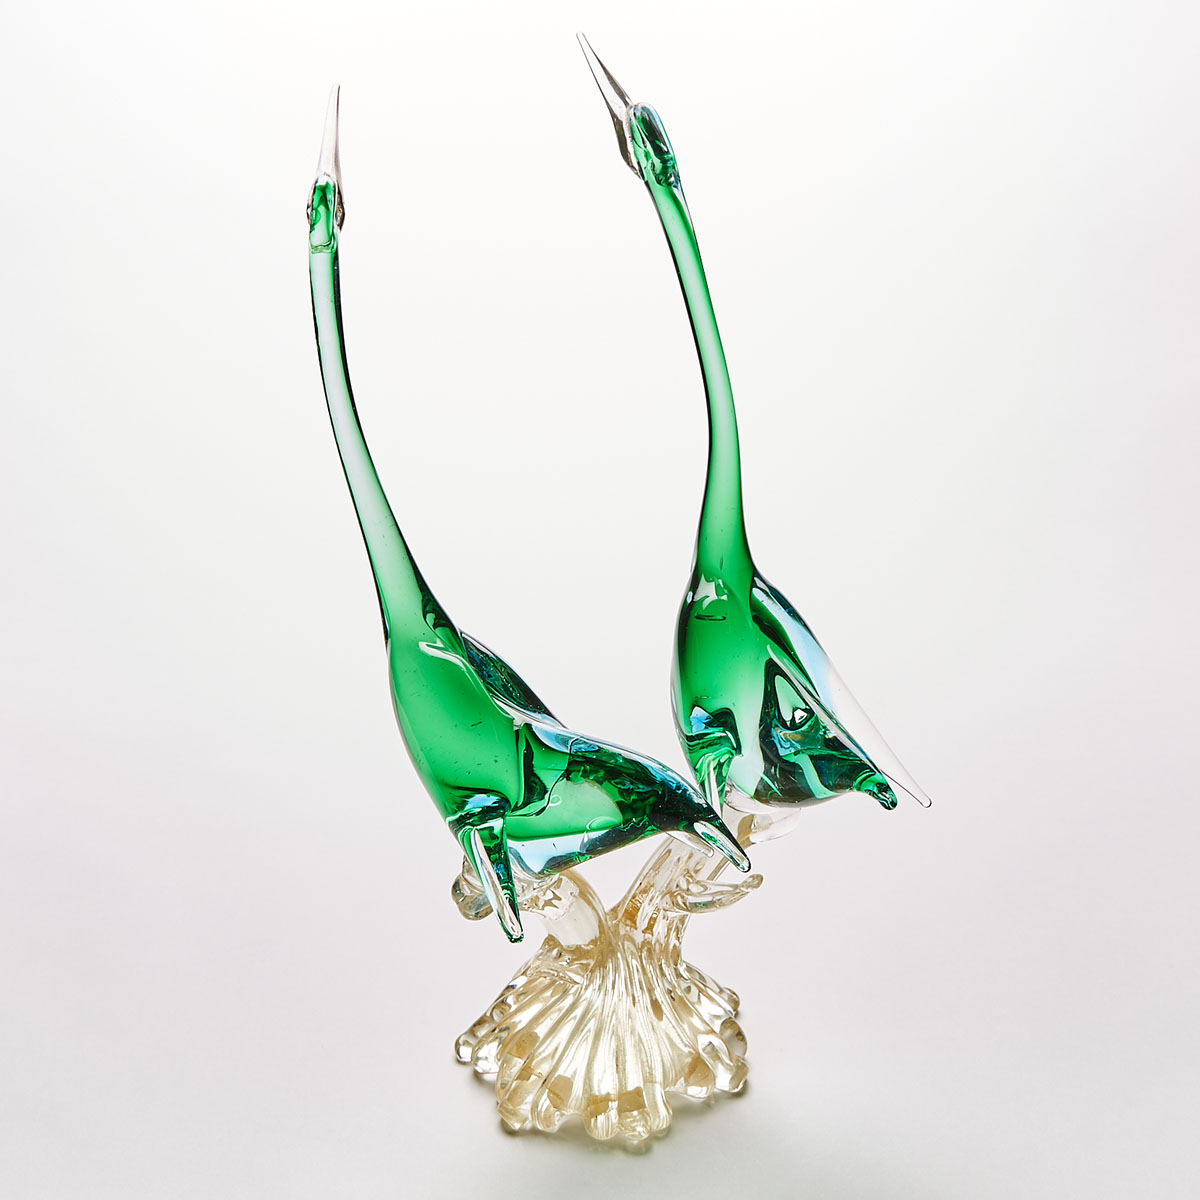 Murano Glass Group of Two Green Cranes, probably Seguso, mid-20th century